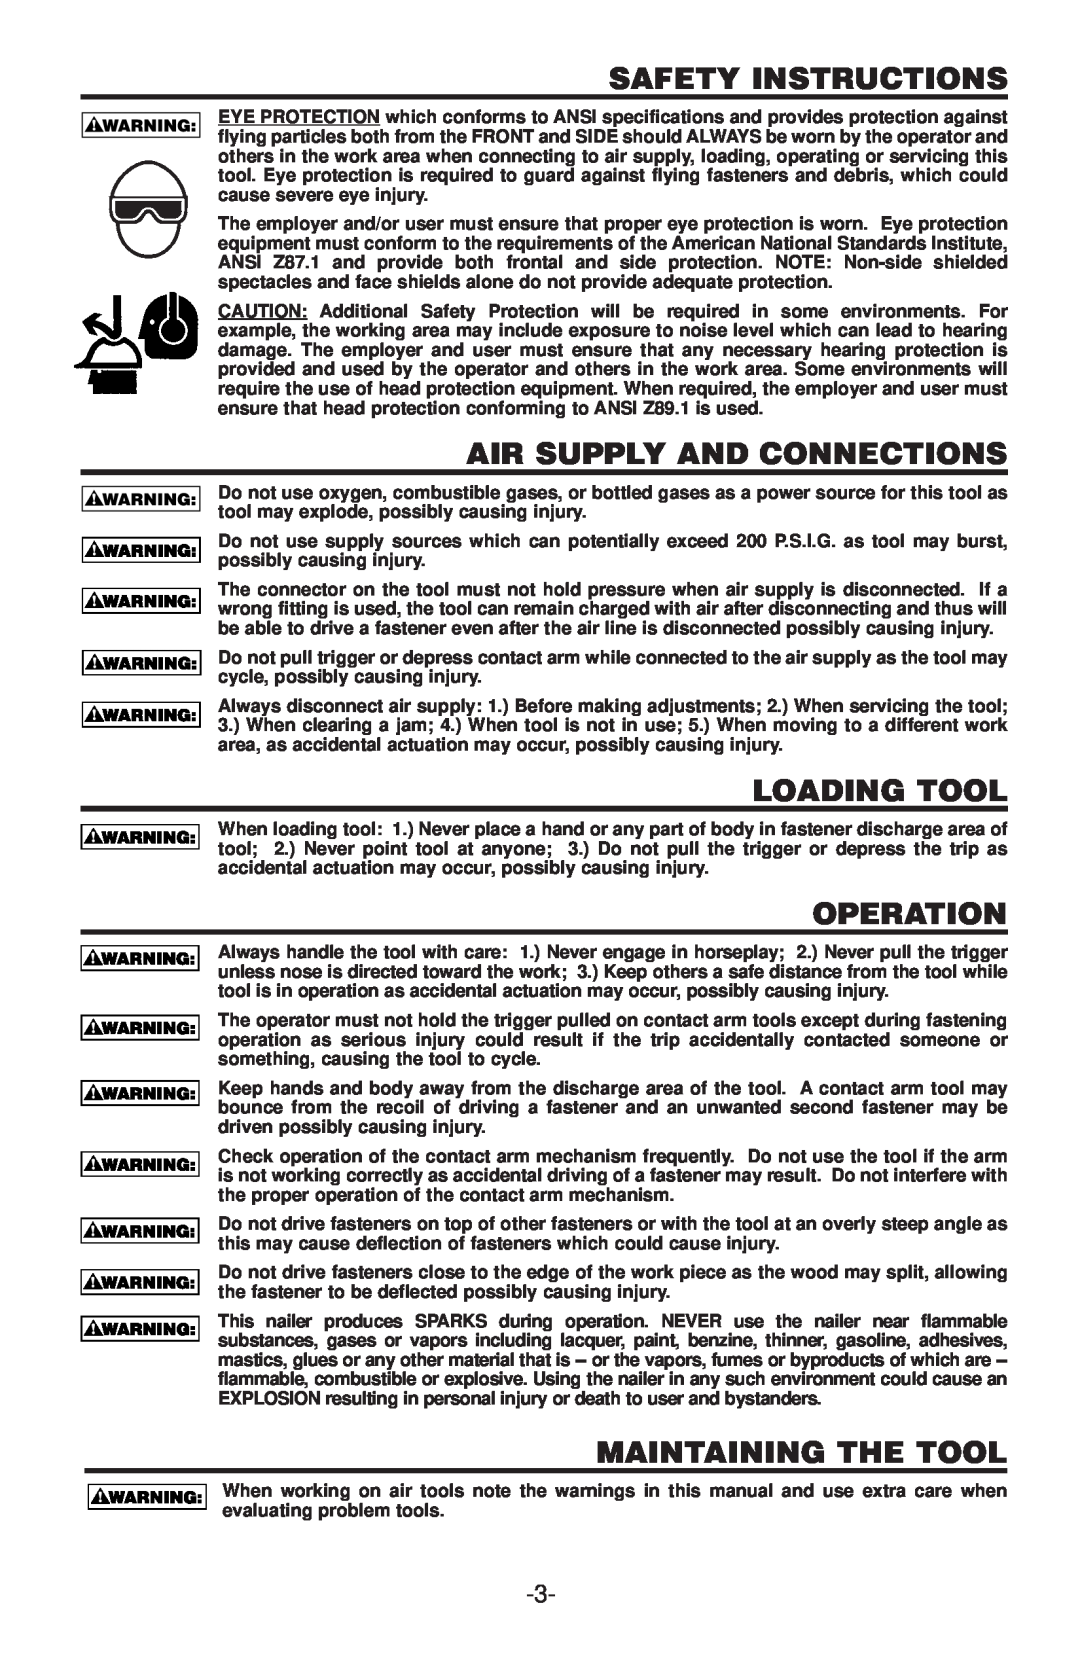 Inova USO56, SX150-BHF manual Safety Instructions, Air Supply And Connections, Loading Tool, Operation, Maintaining The Tool 